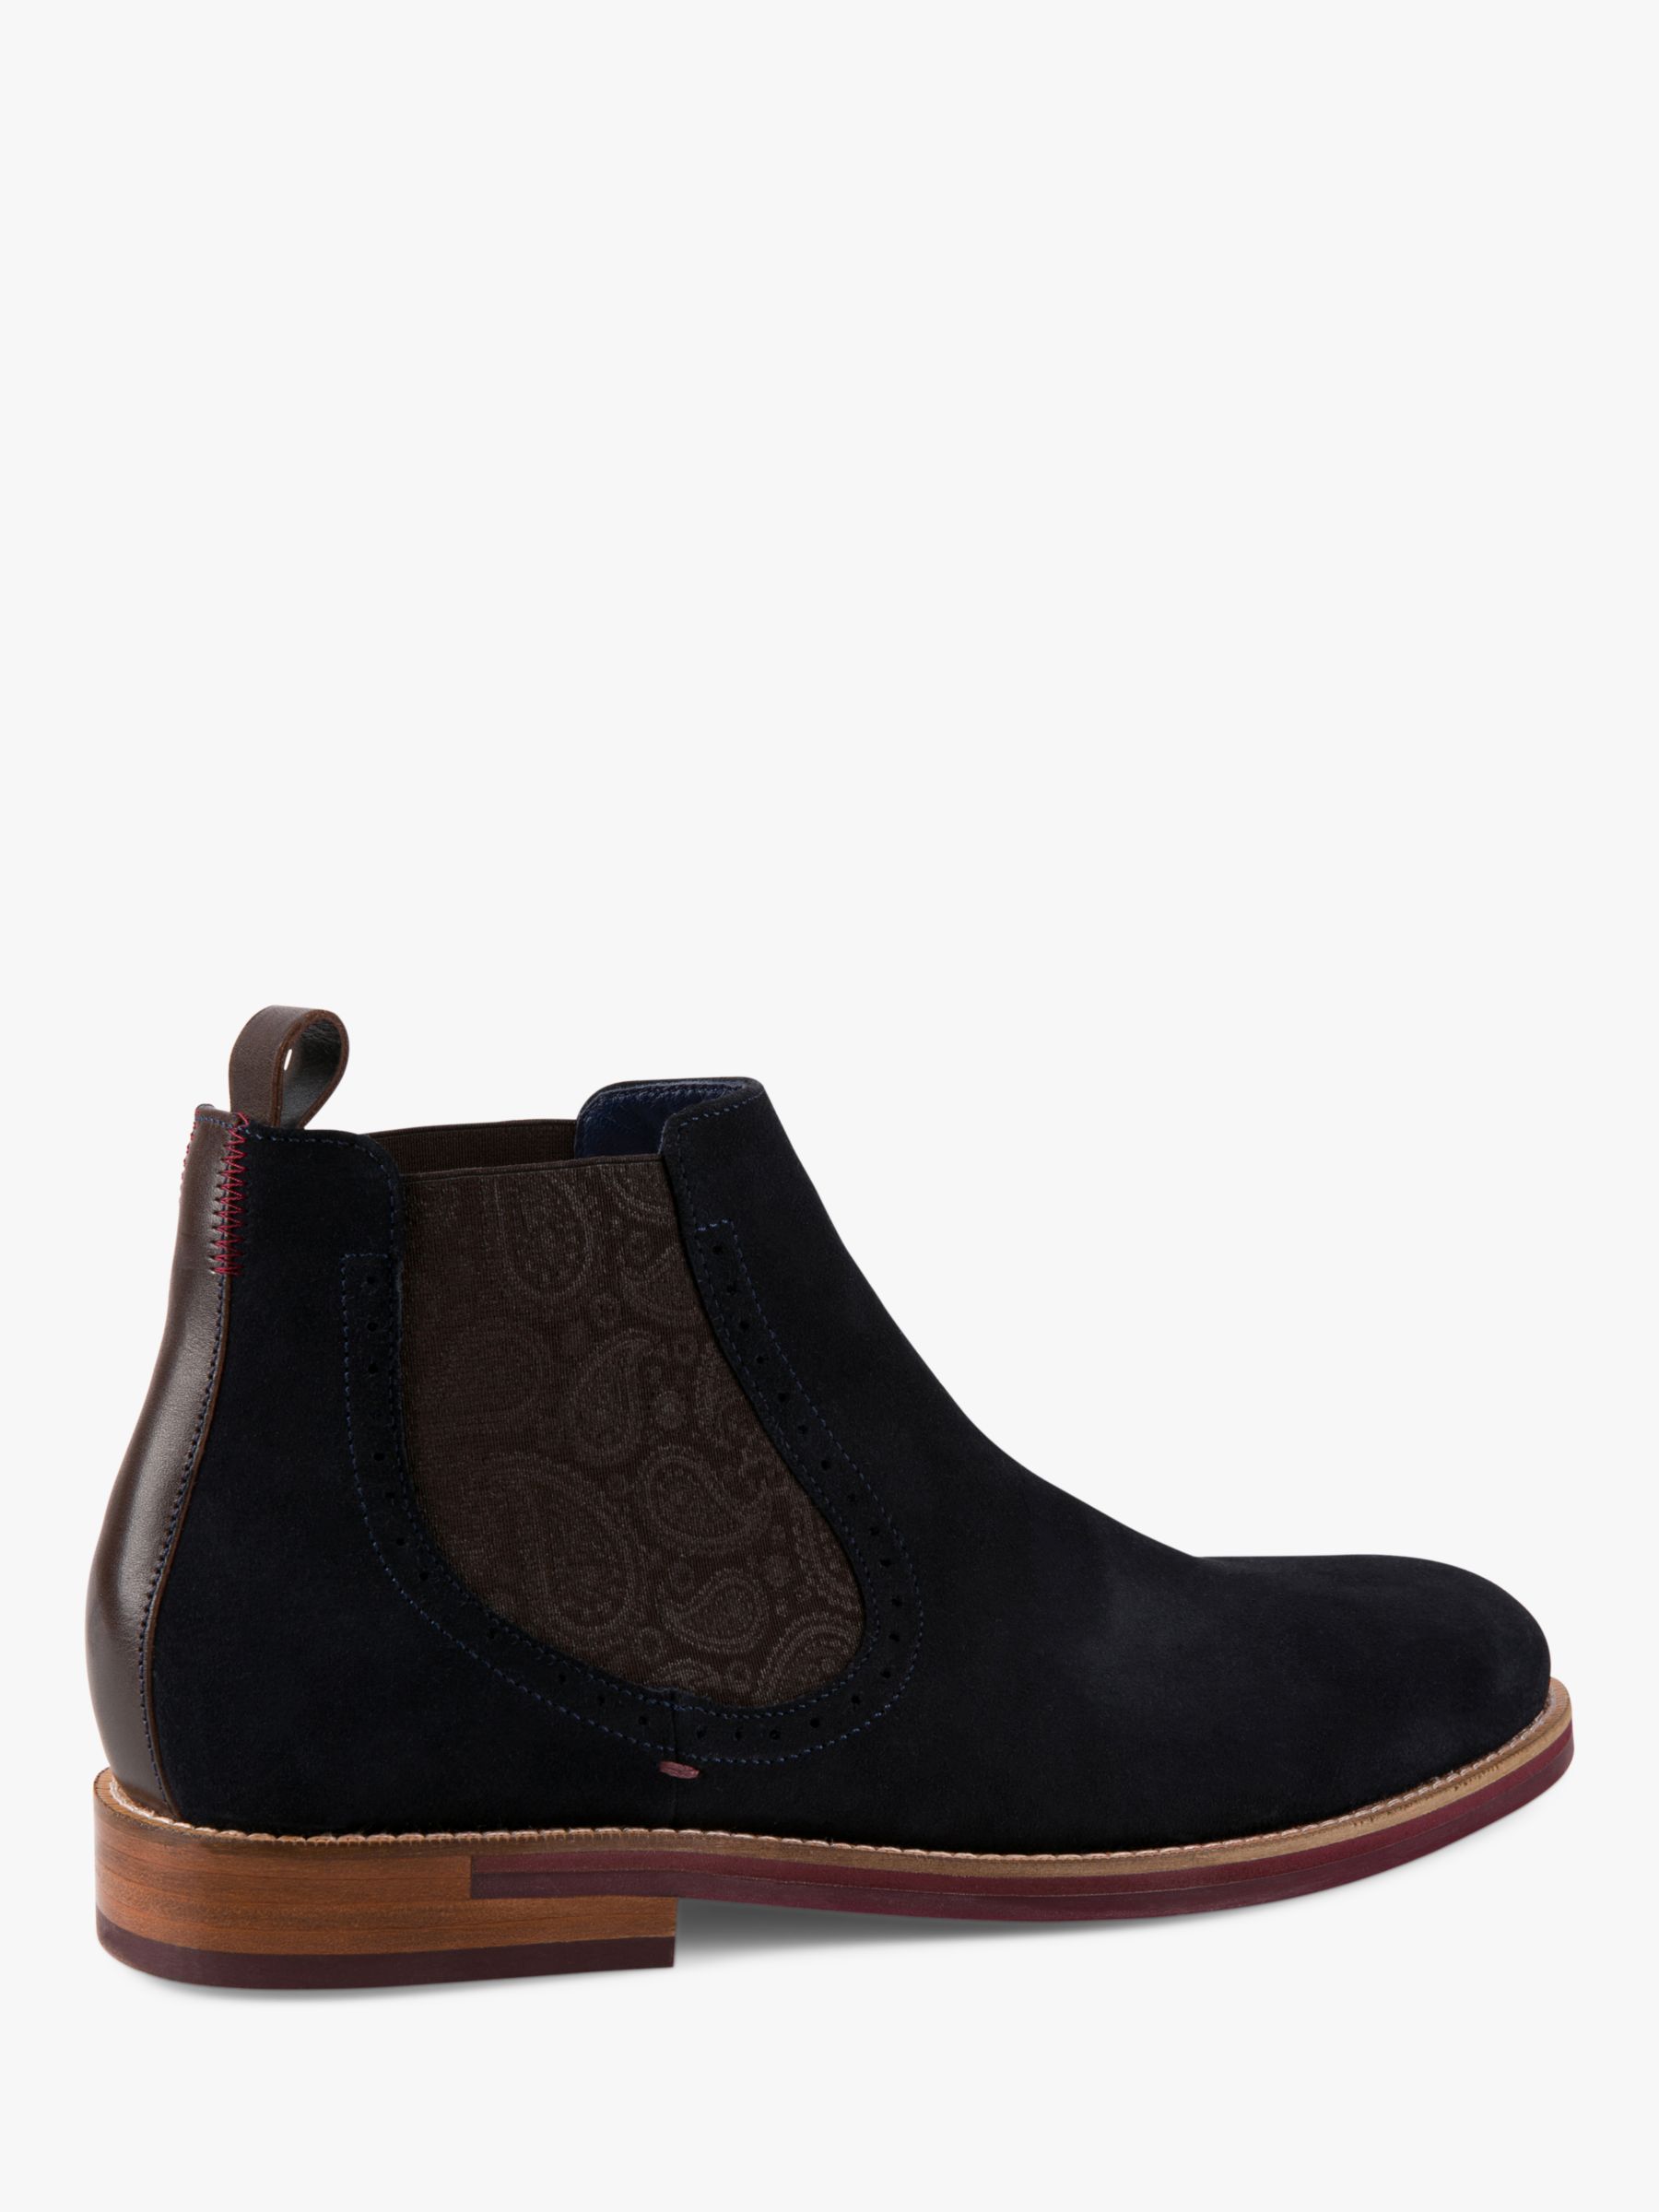 mens chelsea boots ted baker